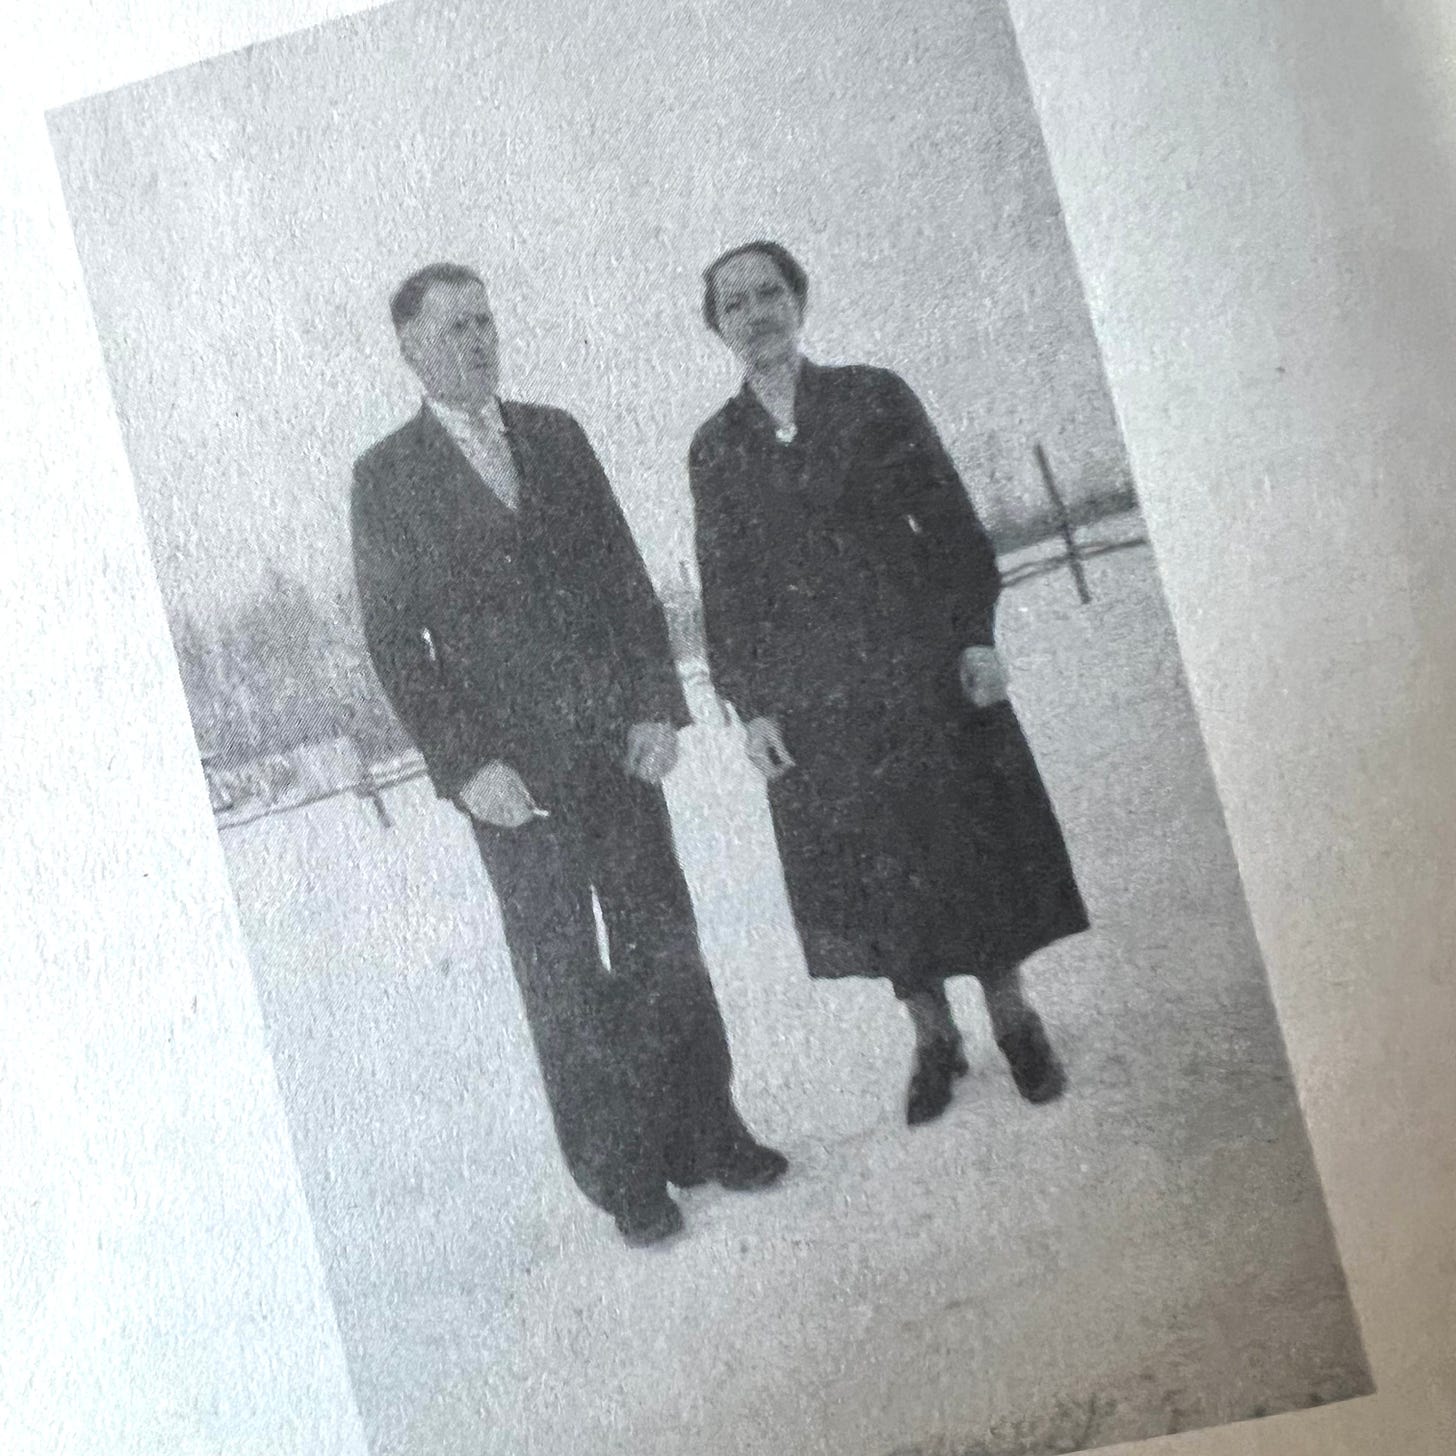 A black and white photo of a man and a woman standing in a frozen field